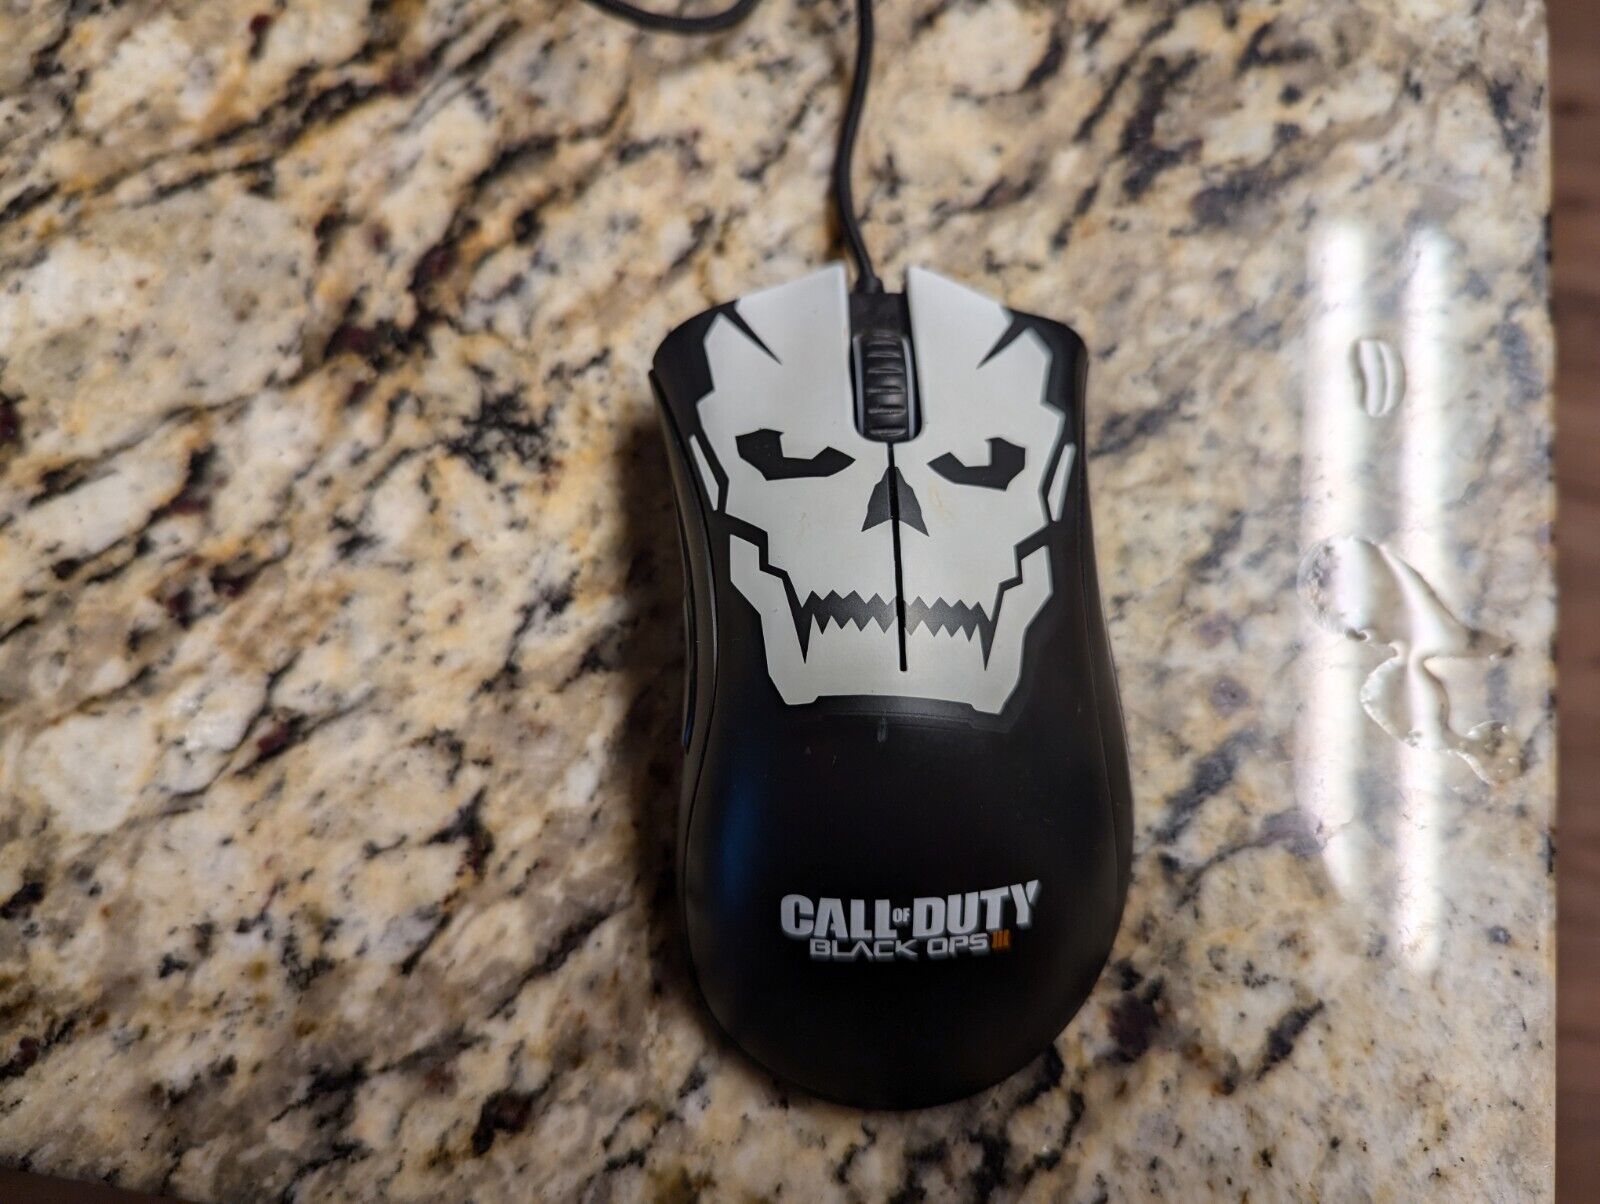 Razer DeathAdder Chroma Call Of Duty Black Ops 3 Gaming Mouse